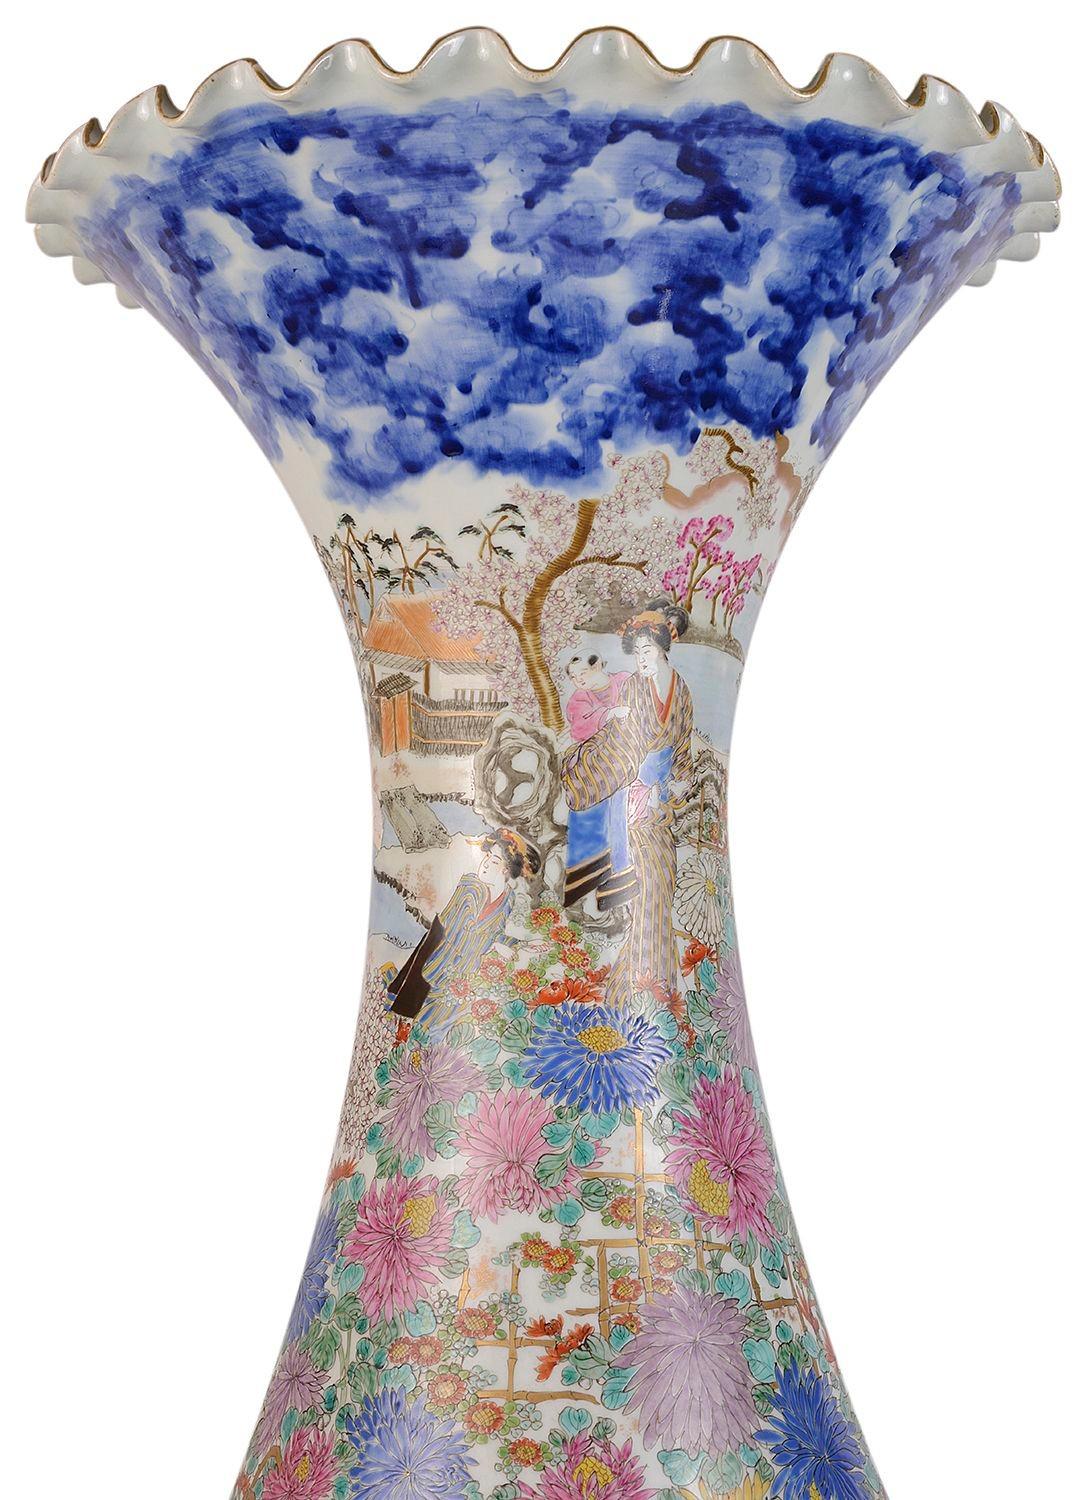 An impressive, good quality late 19th Century Japanese Kutani porcelain crumple edged vase, having boarders of blue and white clouds above and stormy waves below, three men in boat looking up at women and child walking through the exotic gardens.
 
